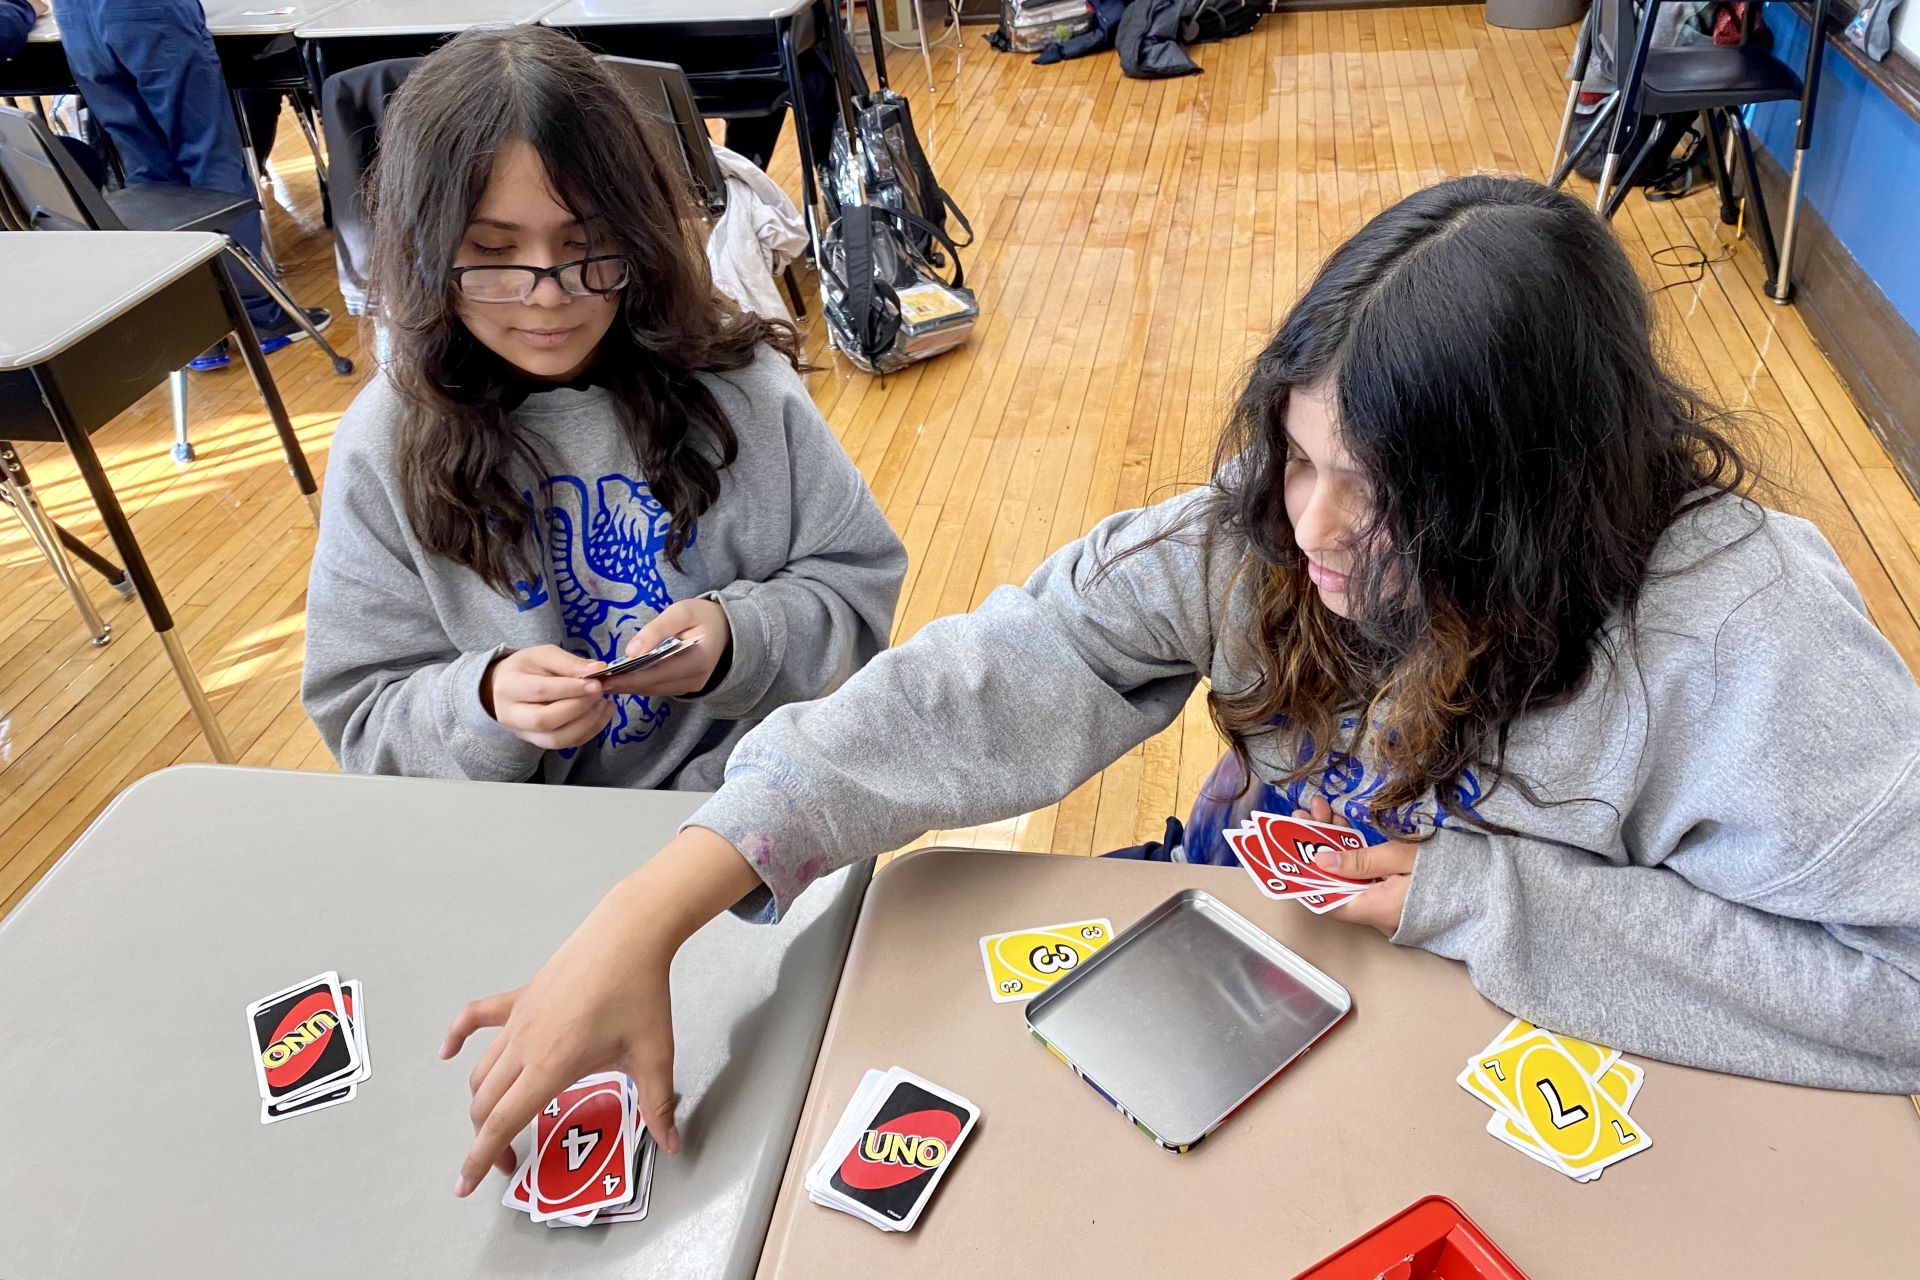 Two students play Uno